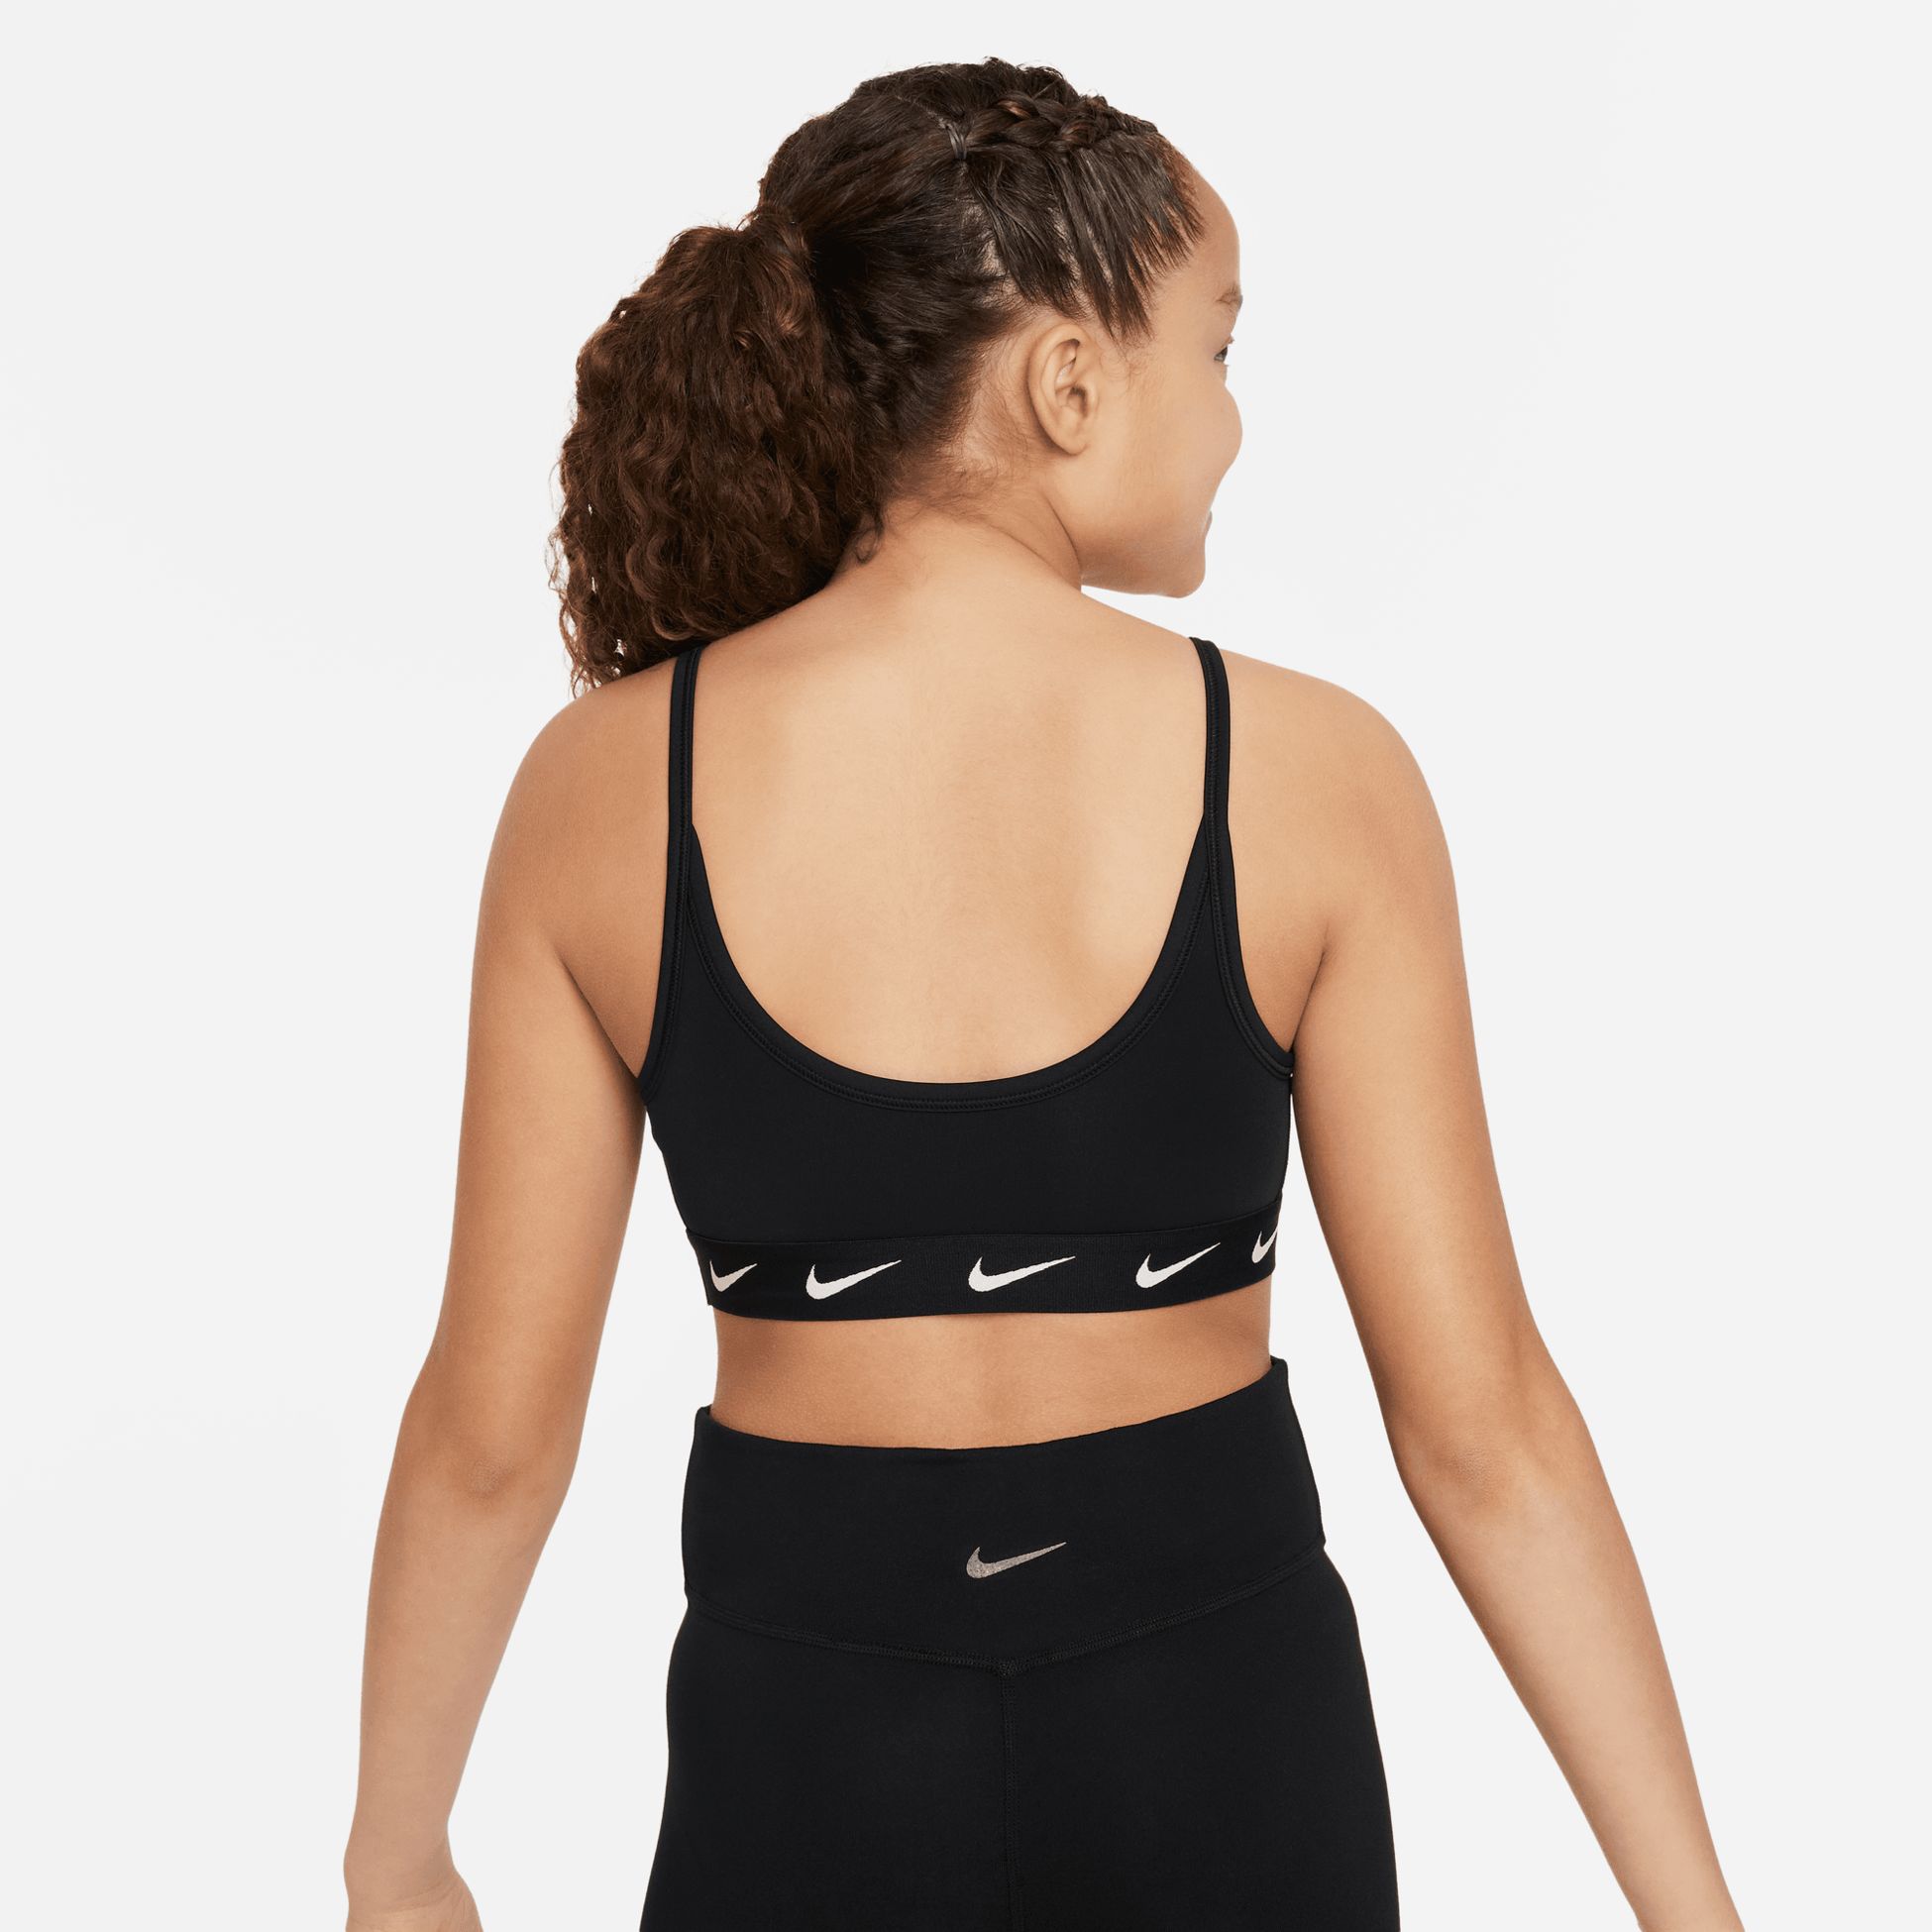 NIKE, G DF ONE TOP